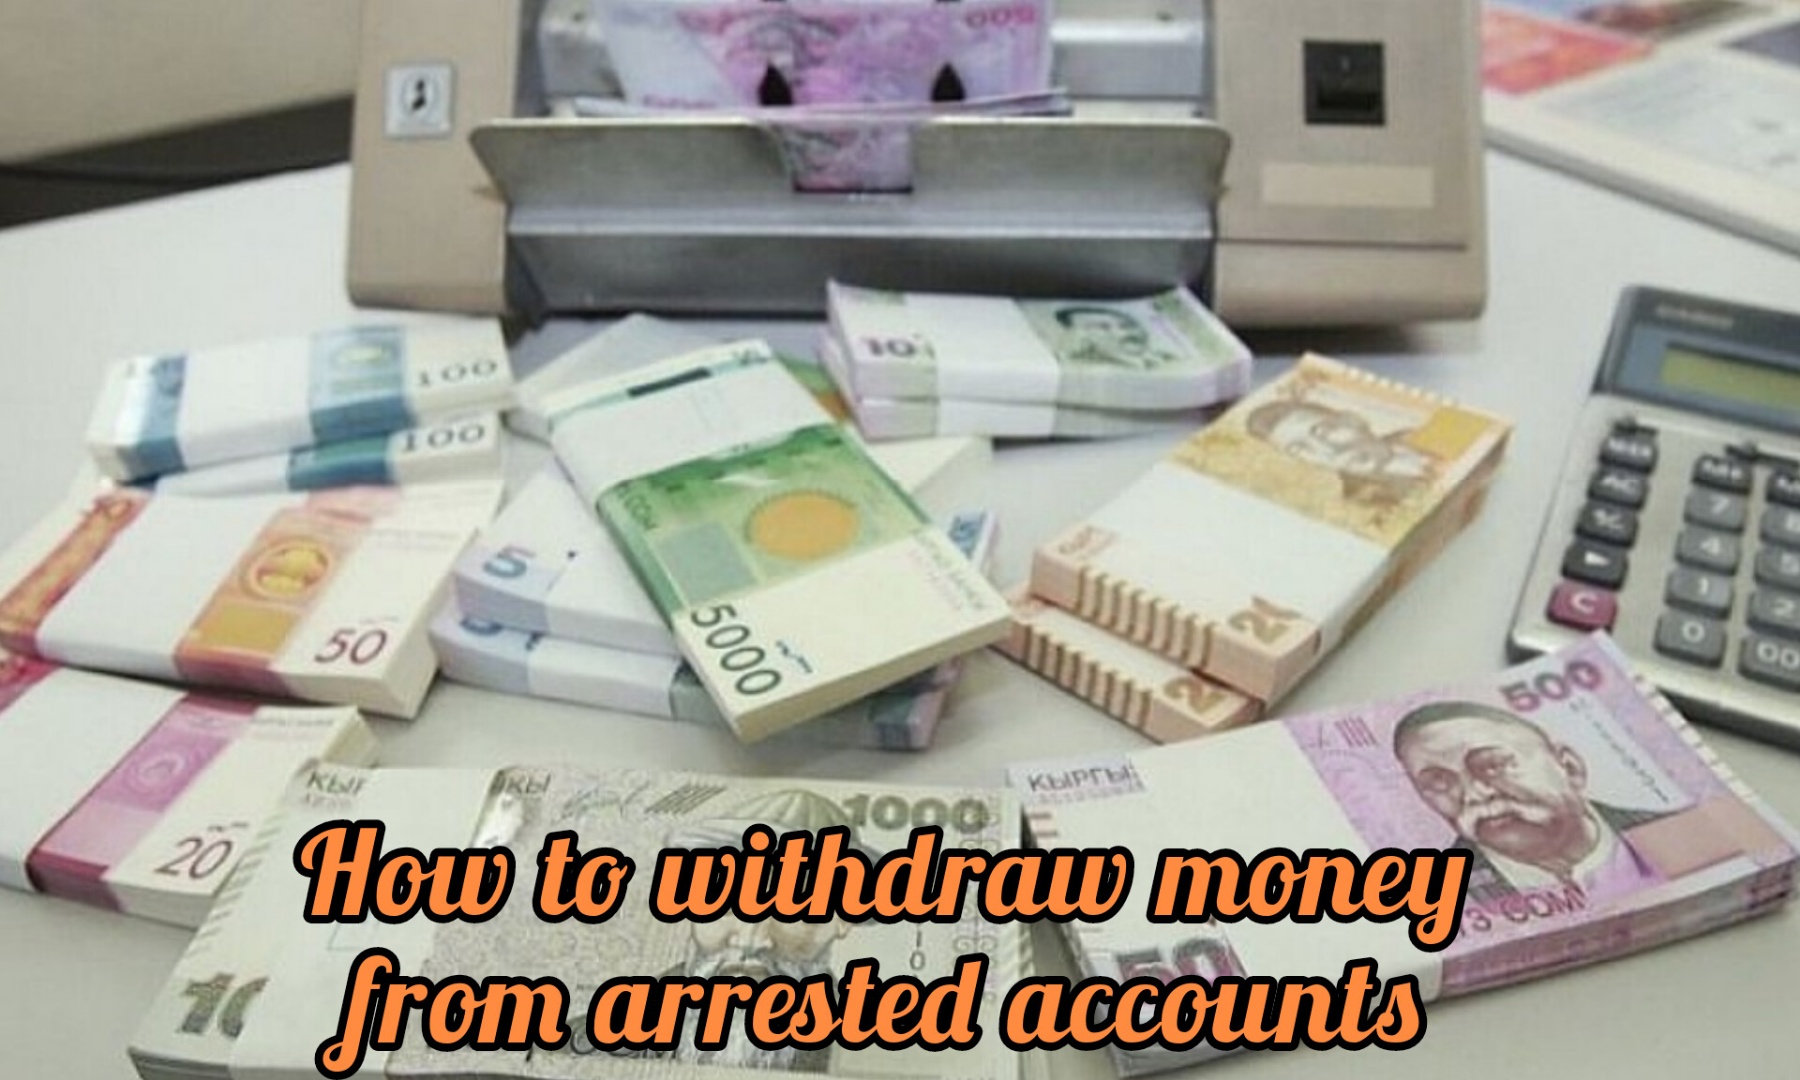 HOW TO WITHDRAW MONEY FROM “ARRESTED” ACCOUNTS?